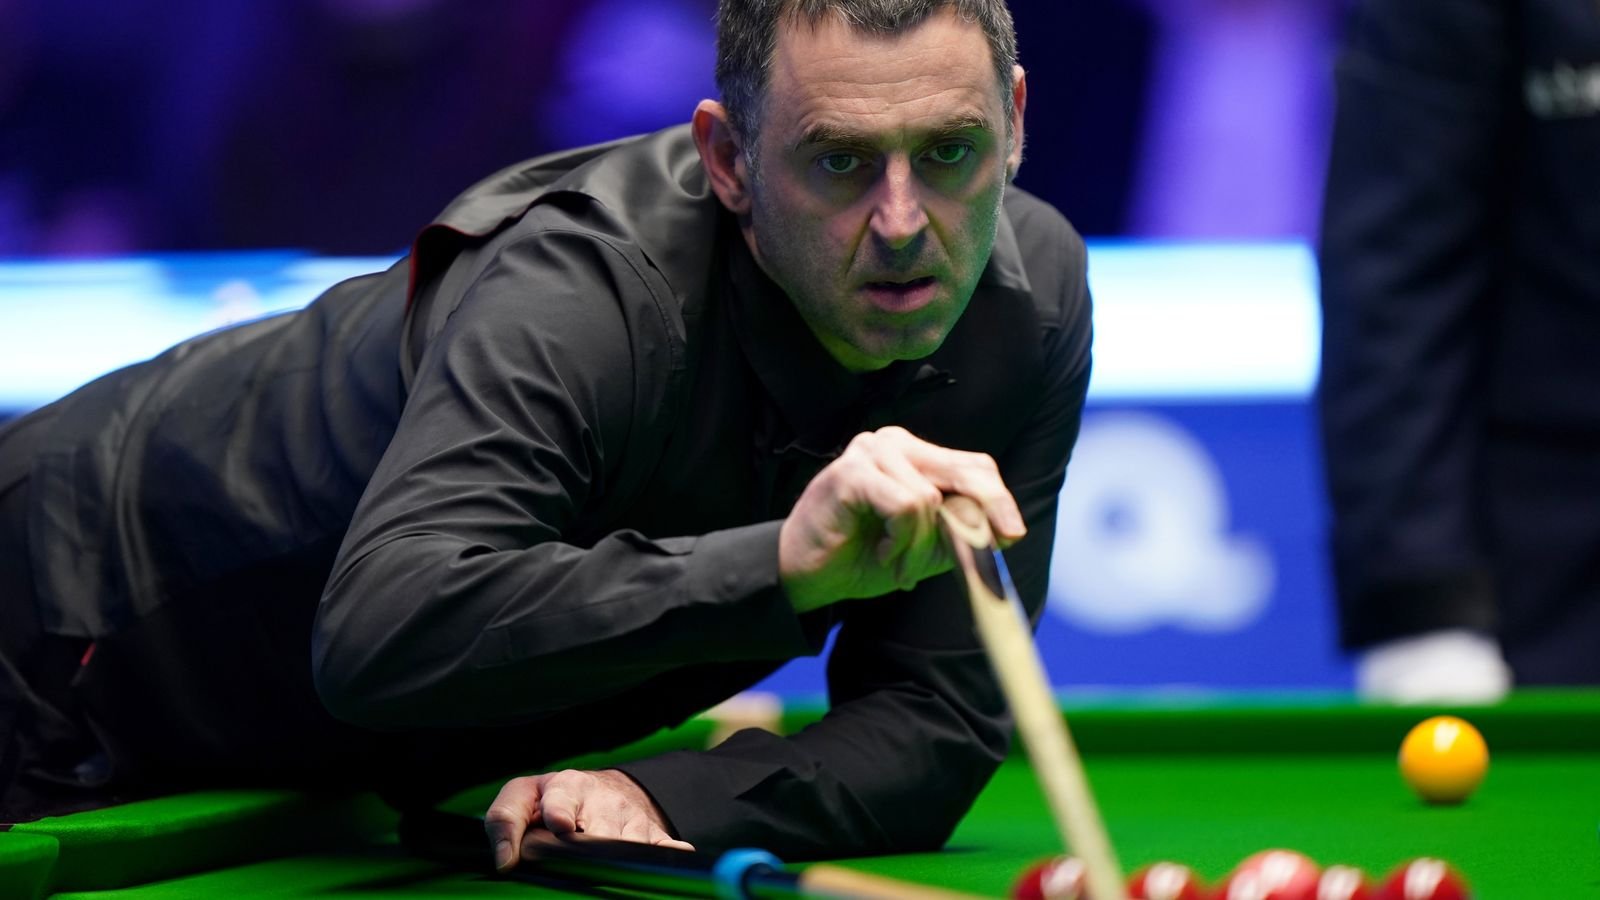 Ronnie O’Sullivan beats Ali Carter in Masters final to claim eighth title after evening fightback | Snooker News